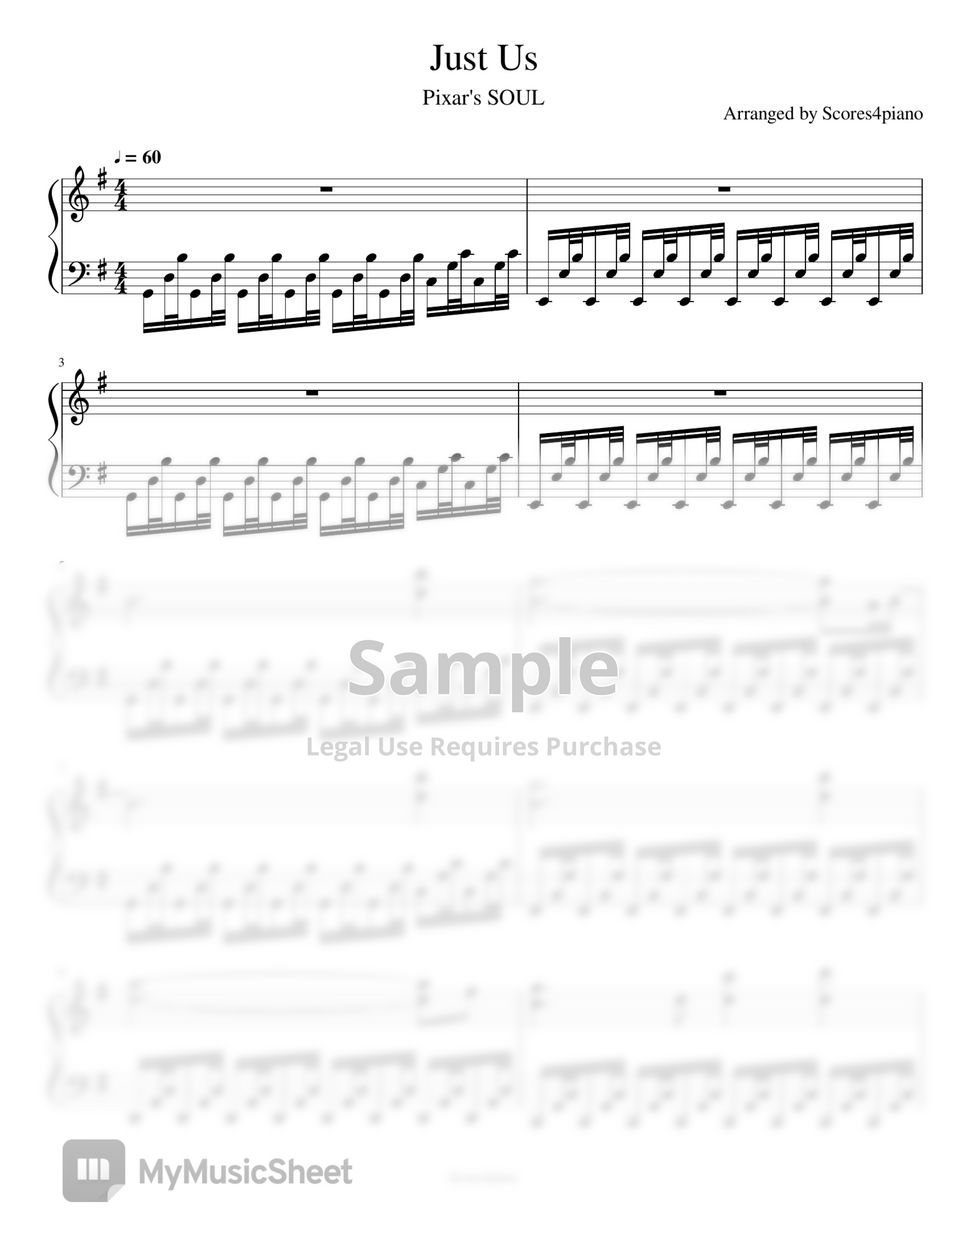 Pixar's SOUL - Just Us (Advanced) by Scores4piano